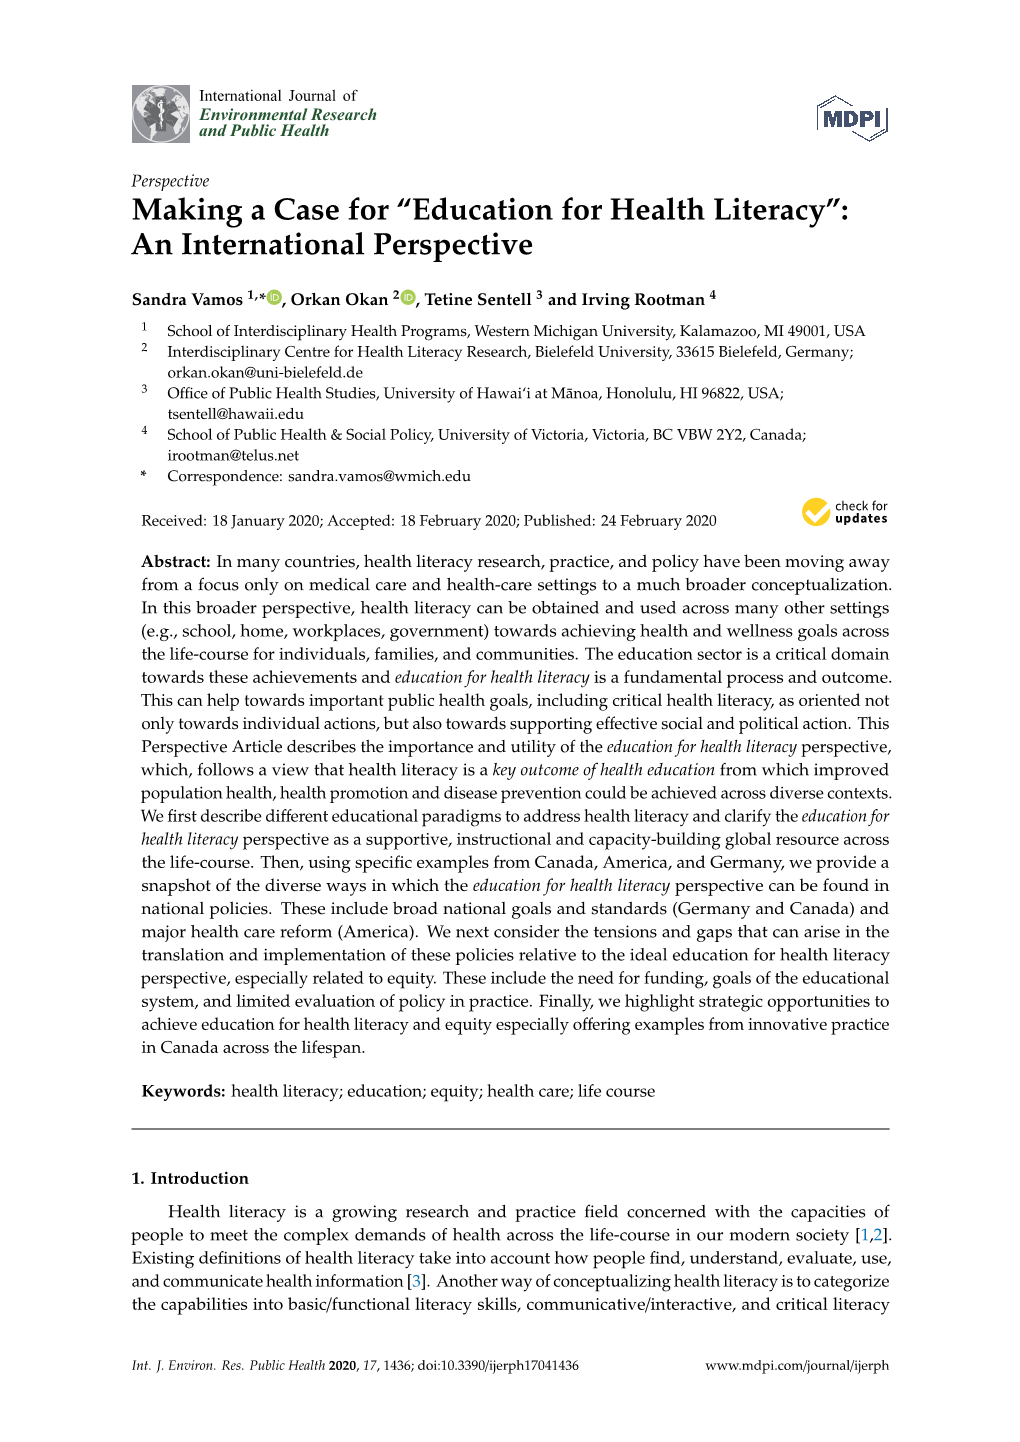 Education for Health Literacy”: an International Perspective